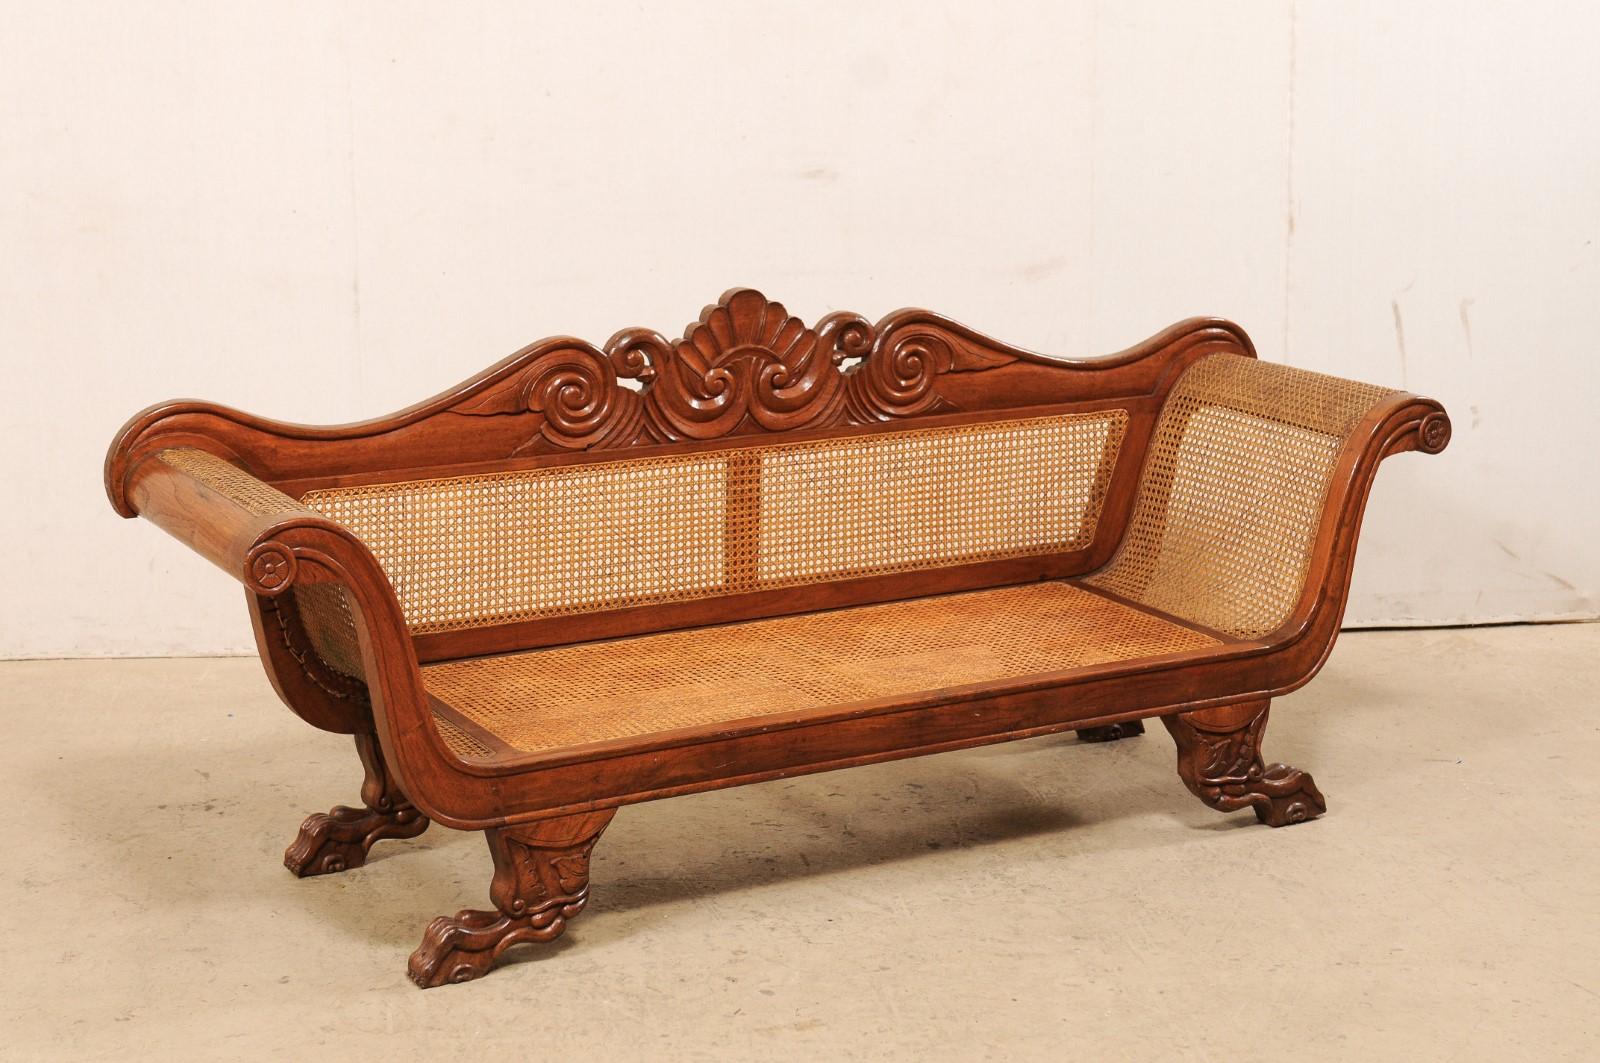 A Caribbean Regency carved-wood and cane sofa from the early 20th century. This antique sofa from Jamaica features a carved crest in shell and wave motif, gracefully curved arms, and is raised on outward facing paw feet, all typical of the Regency